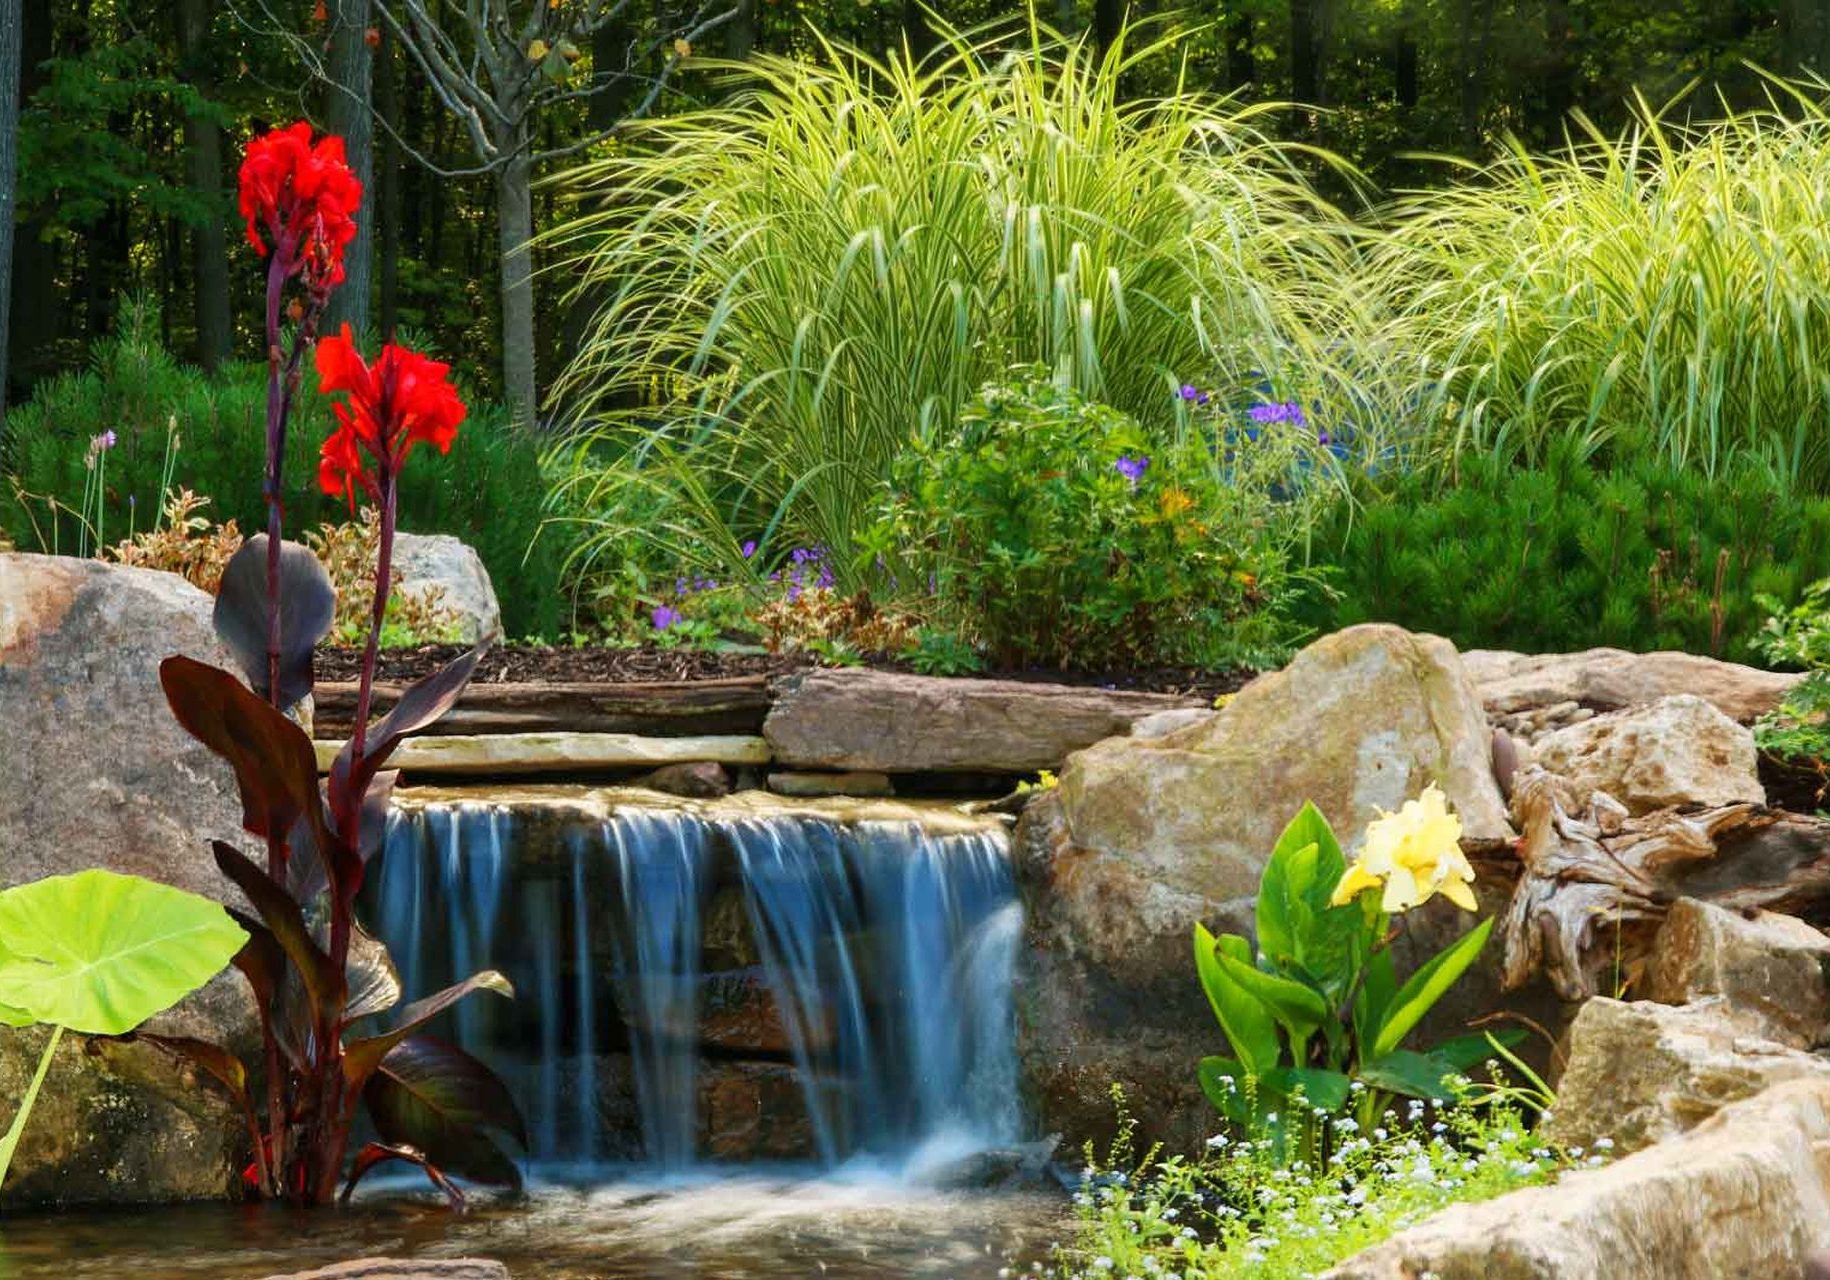 A waterfall in a garden with rocks and flowers.